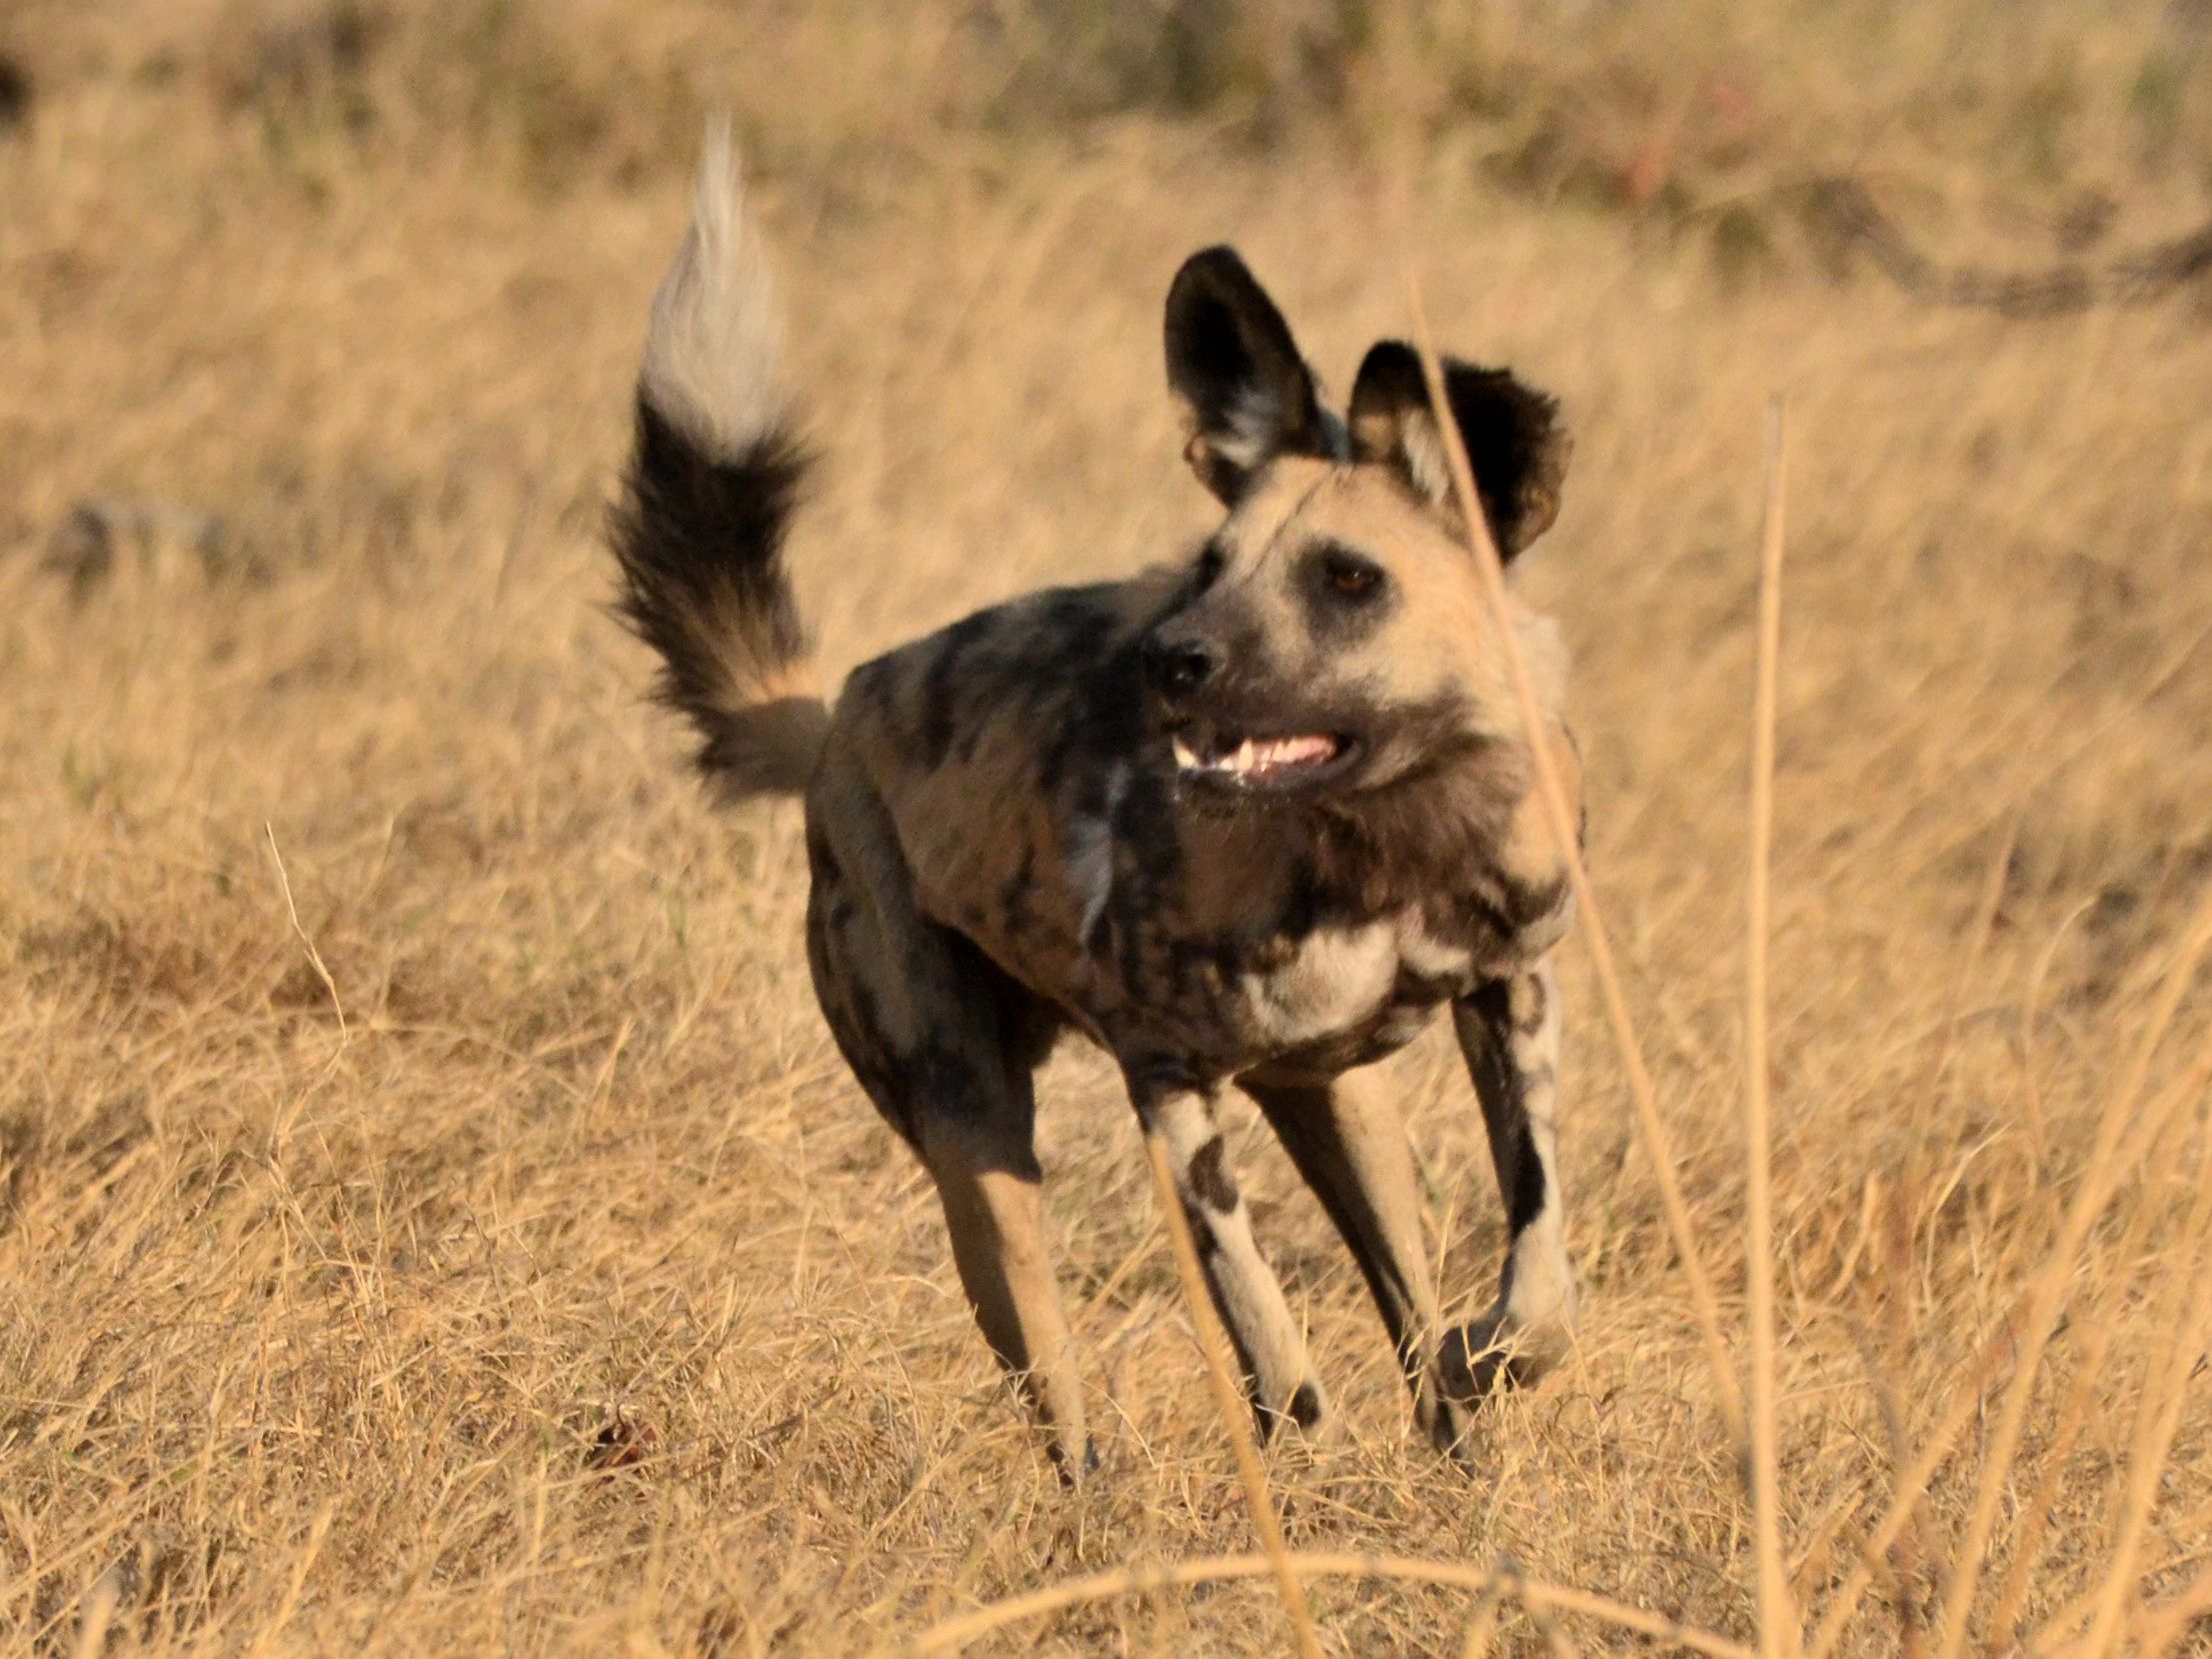 Click picture to see more Fauna  Wild Dogs.